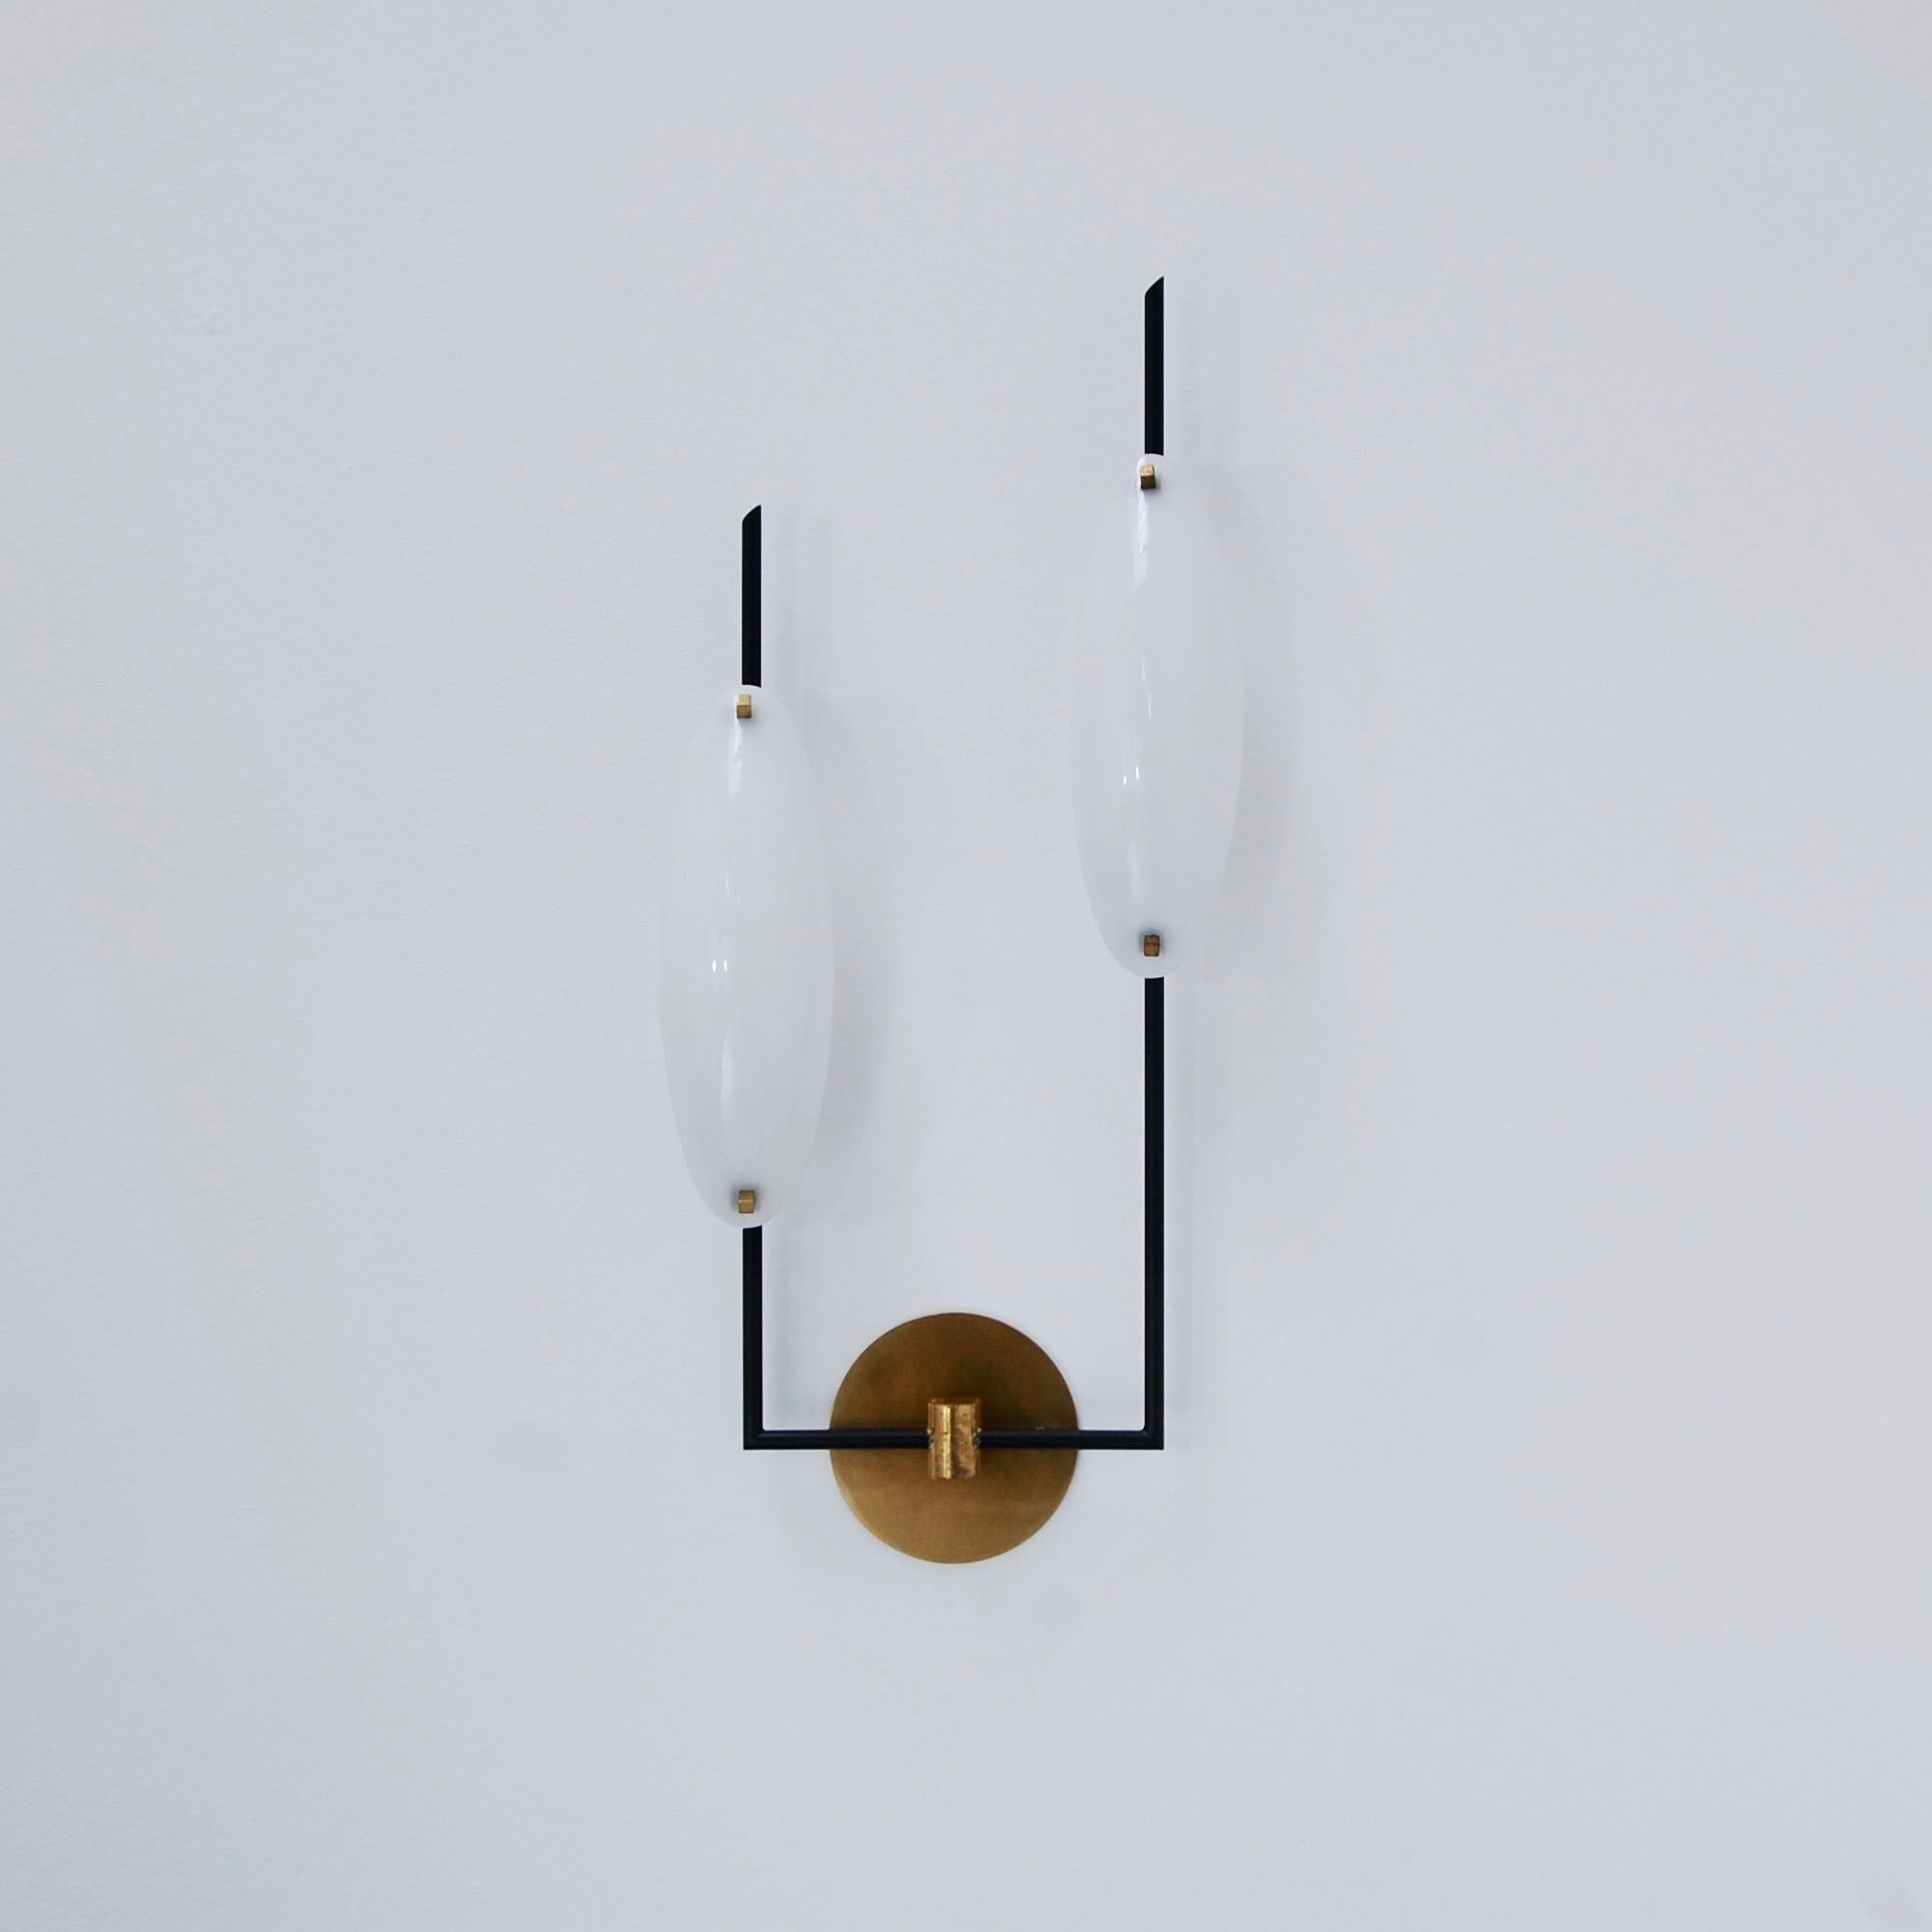 Elegant pair of modern tall sconces by Stilnovo of Italy. Mid-Century Modern 1950s of the period sconces. Patinated brass hardware finish and acrylic shades. Single E12 candelabra based socket per shade (2 per sconce). Currently wired for use in the